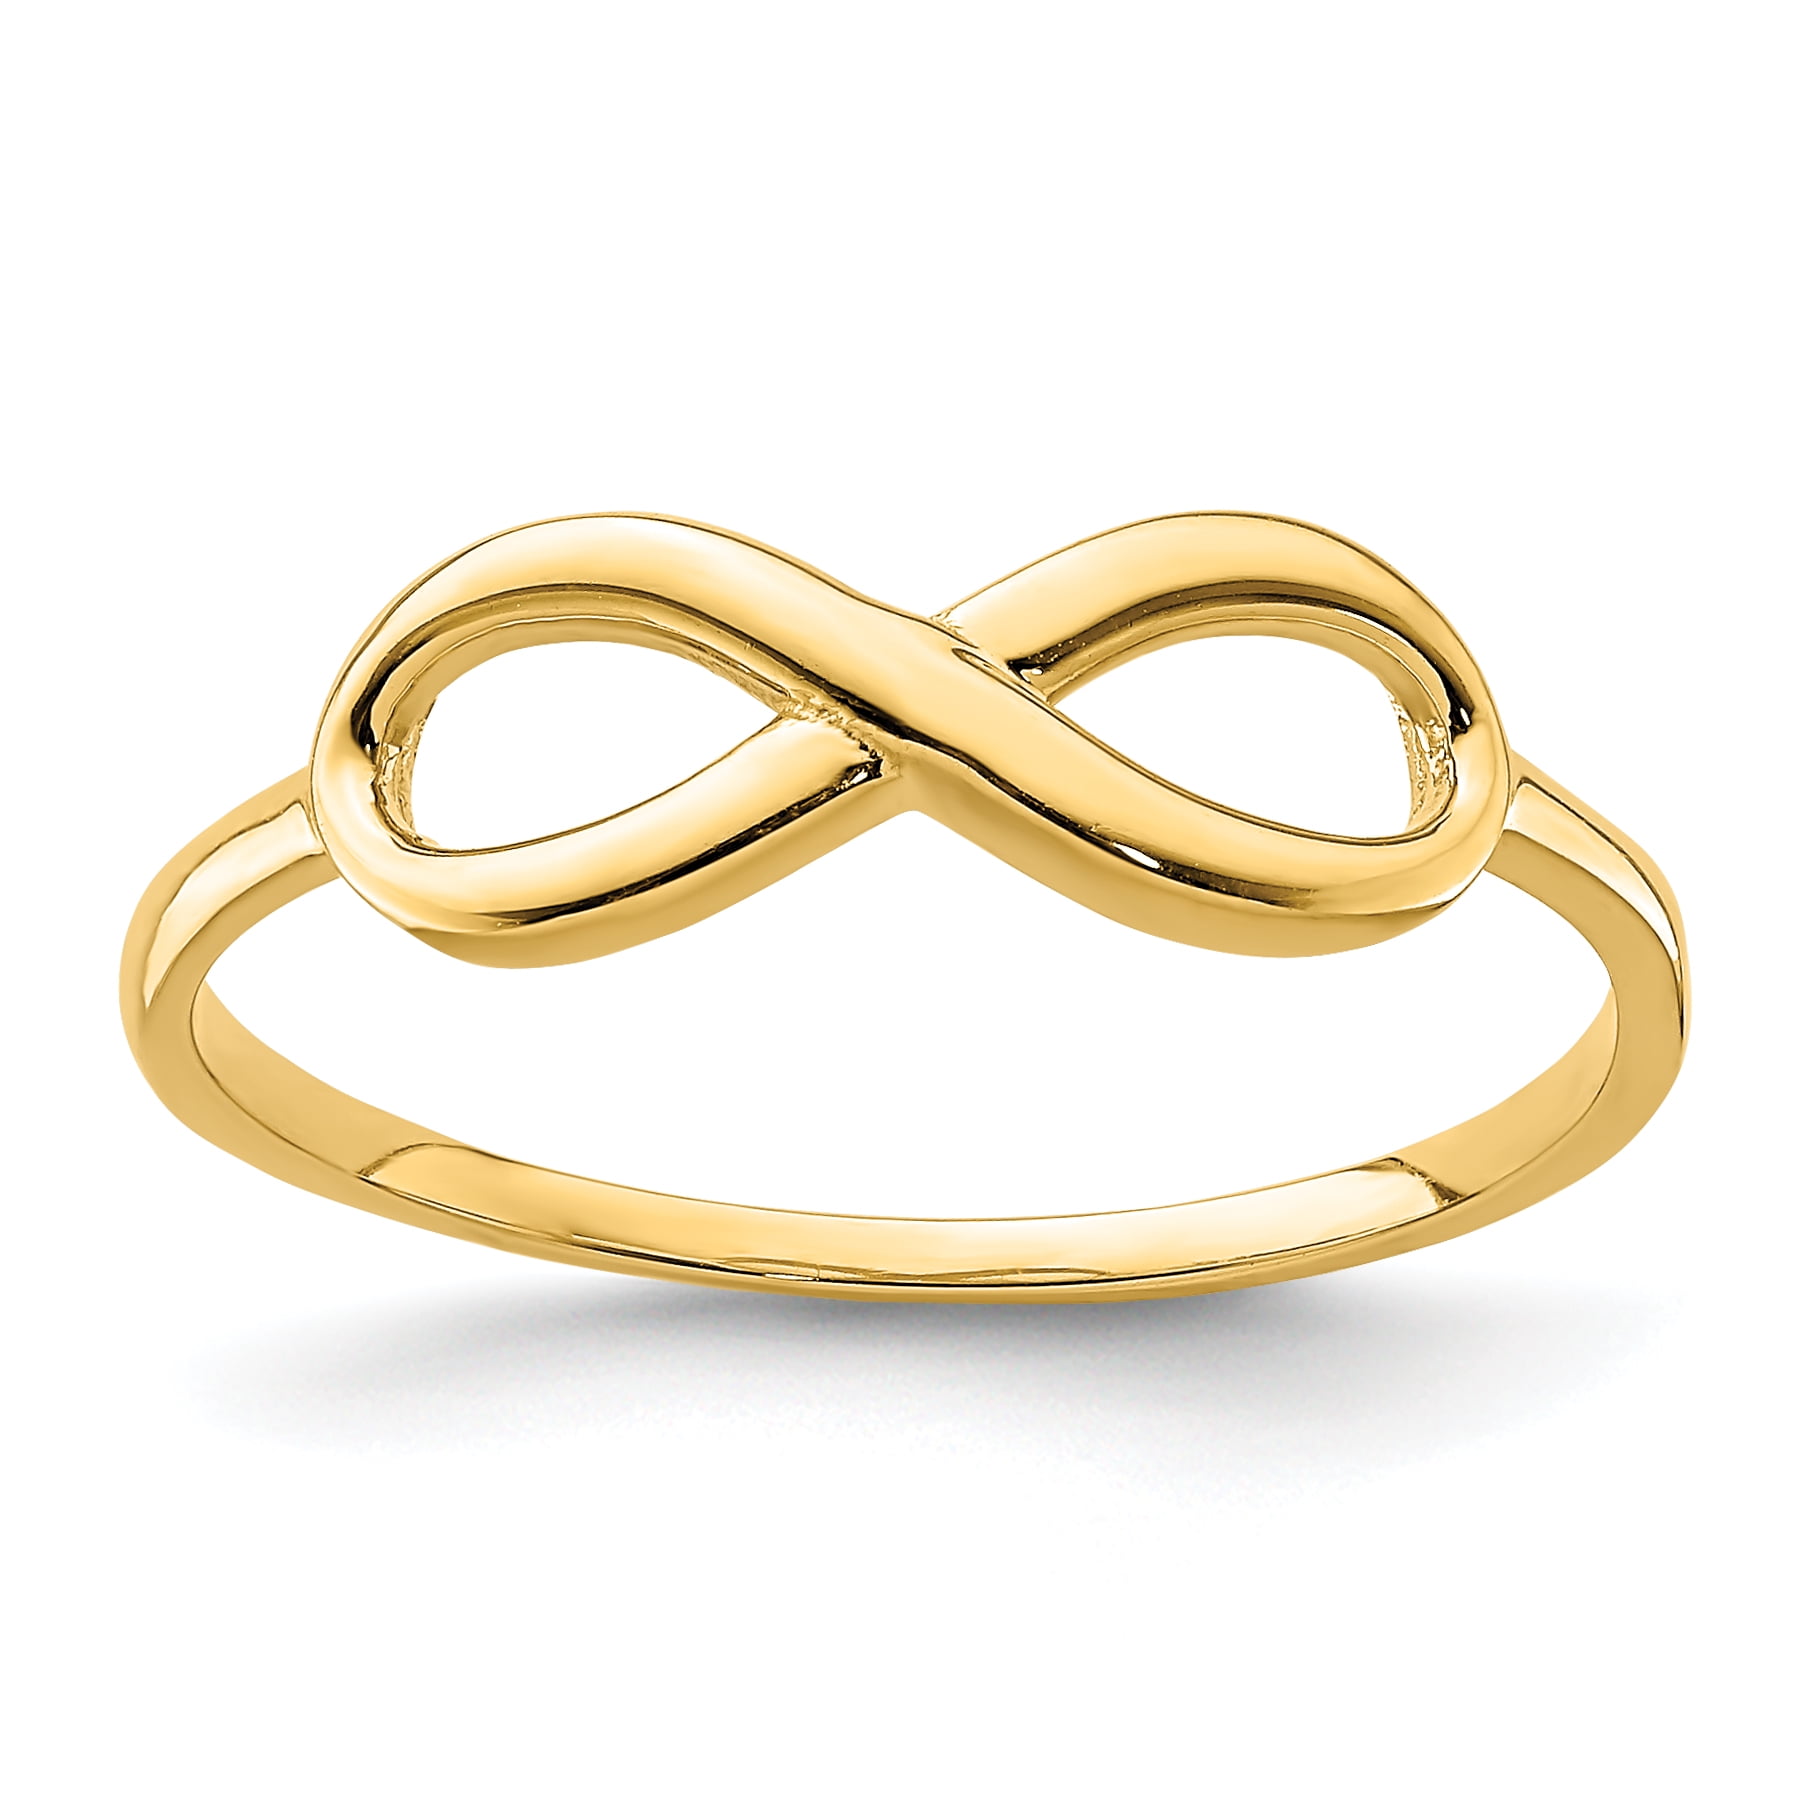 Buy Pipa Bella by Nykaa Fashion Simple Gold Infinity Symbol Ring online